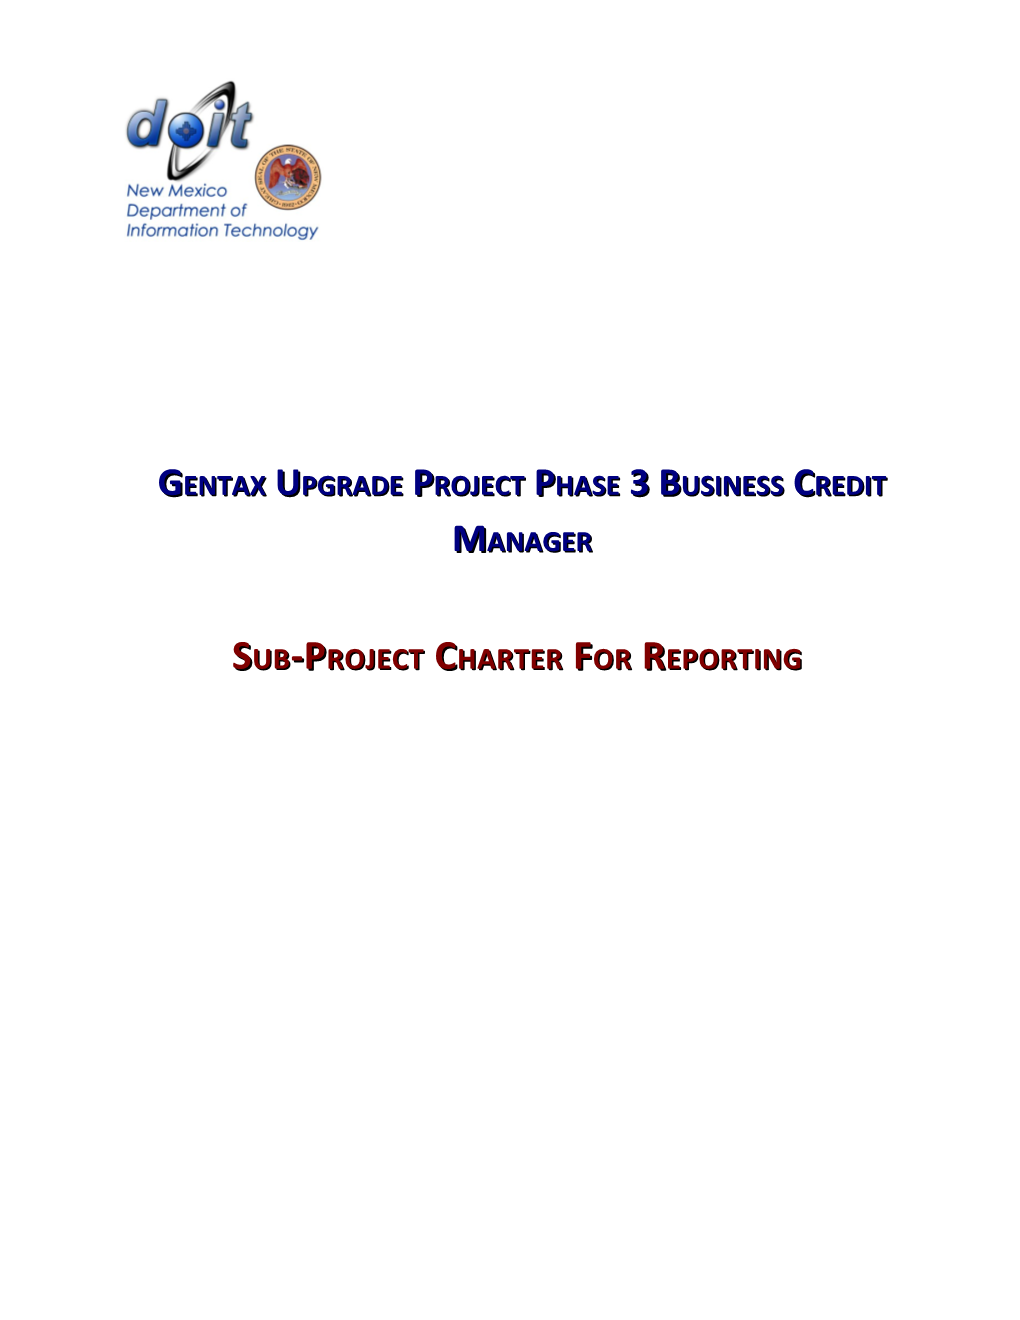 Gentax Upgrade Project Phase 3 Business Credit Manager